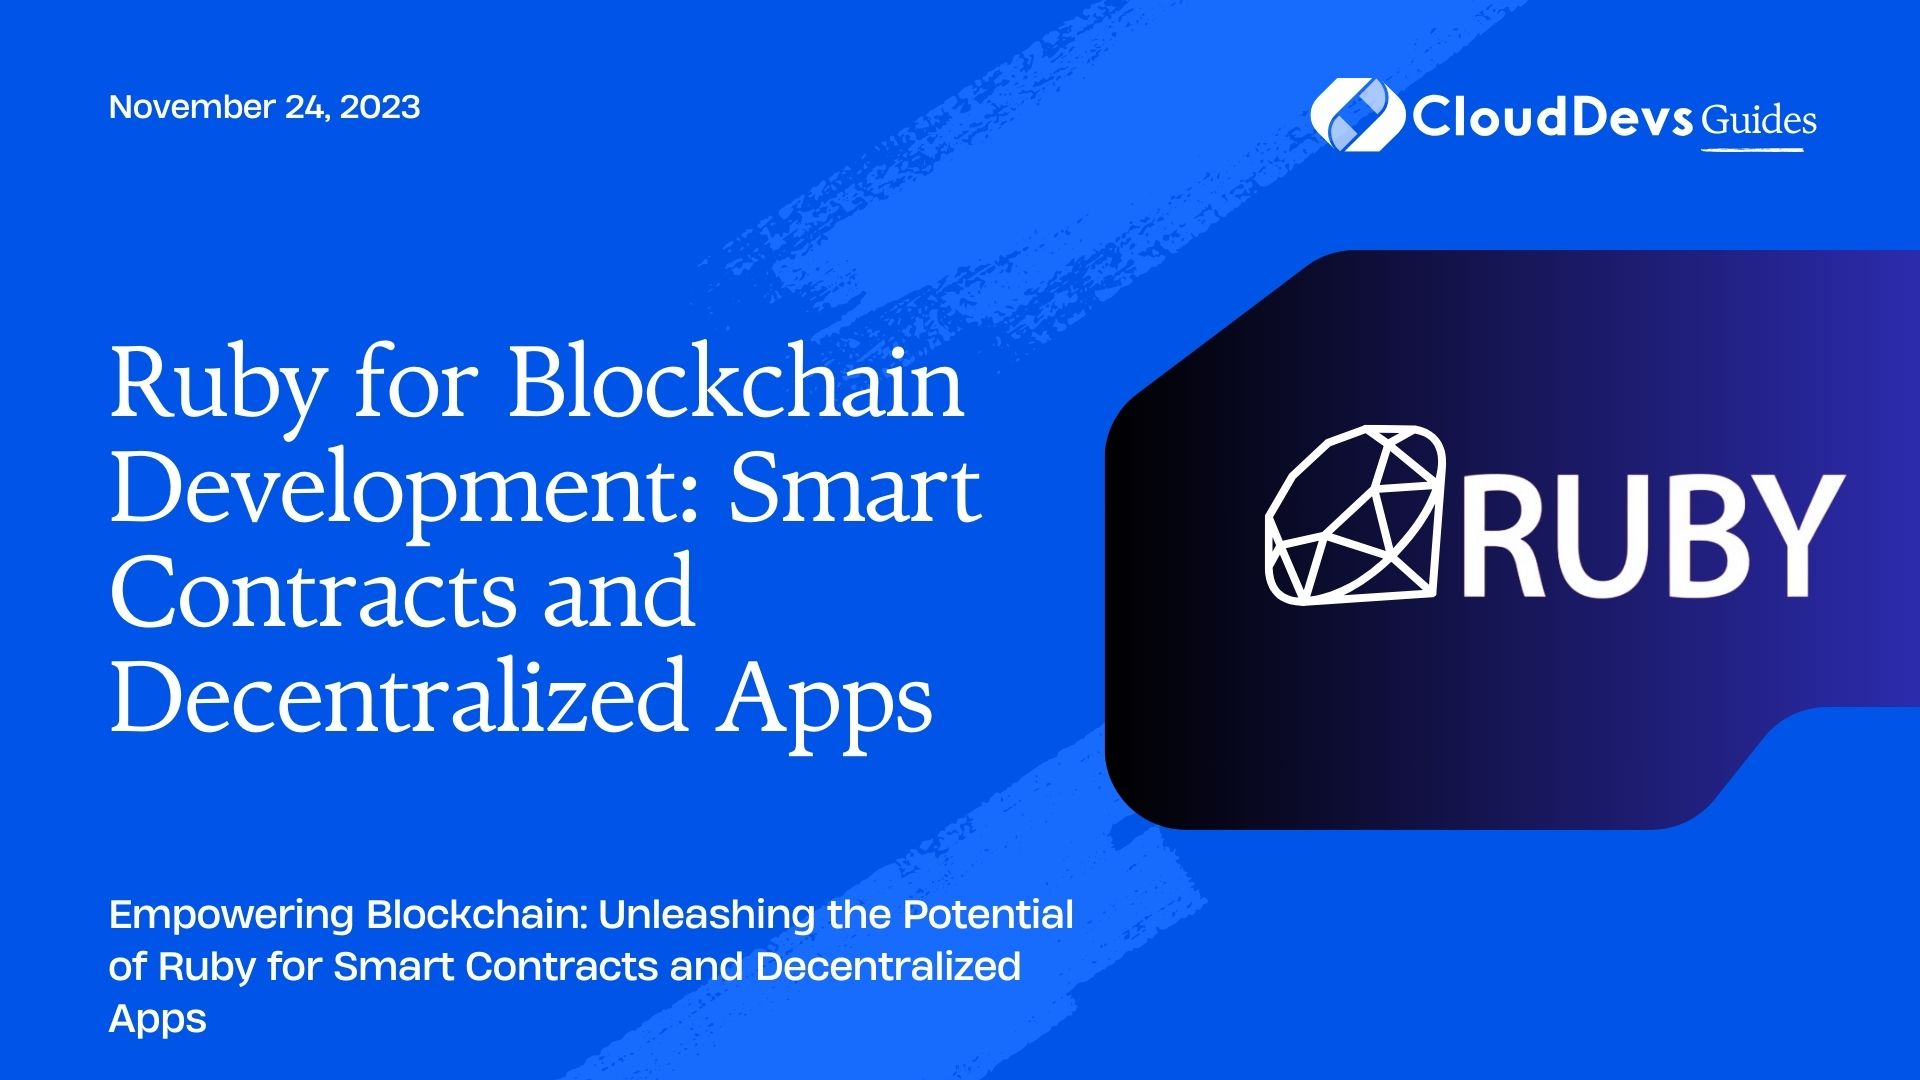 Ruby for Blockchain Development: Smart Contracts and Decentralized Apps